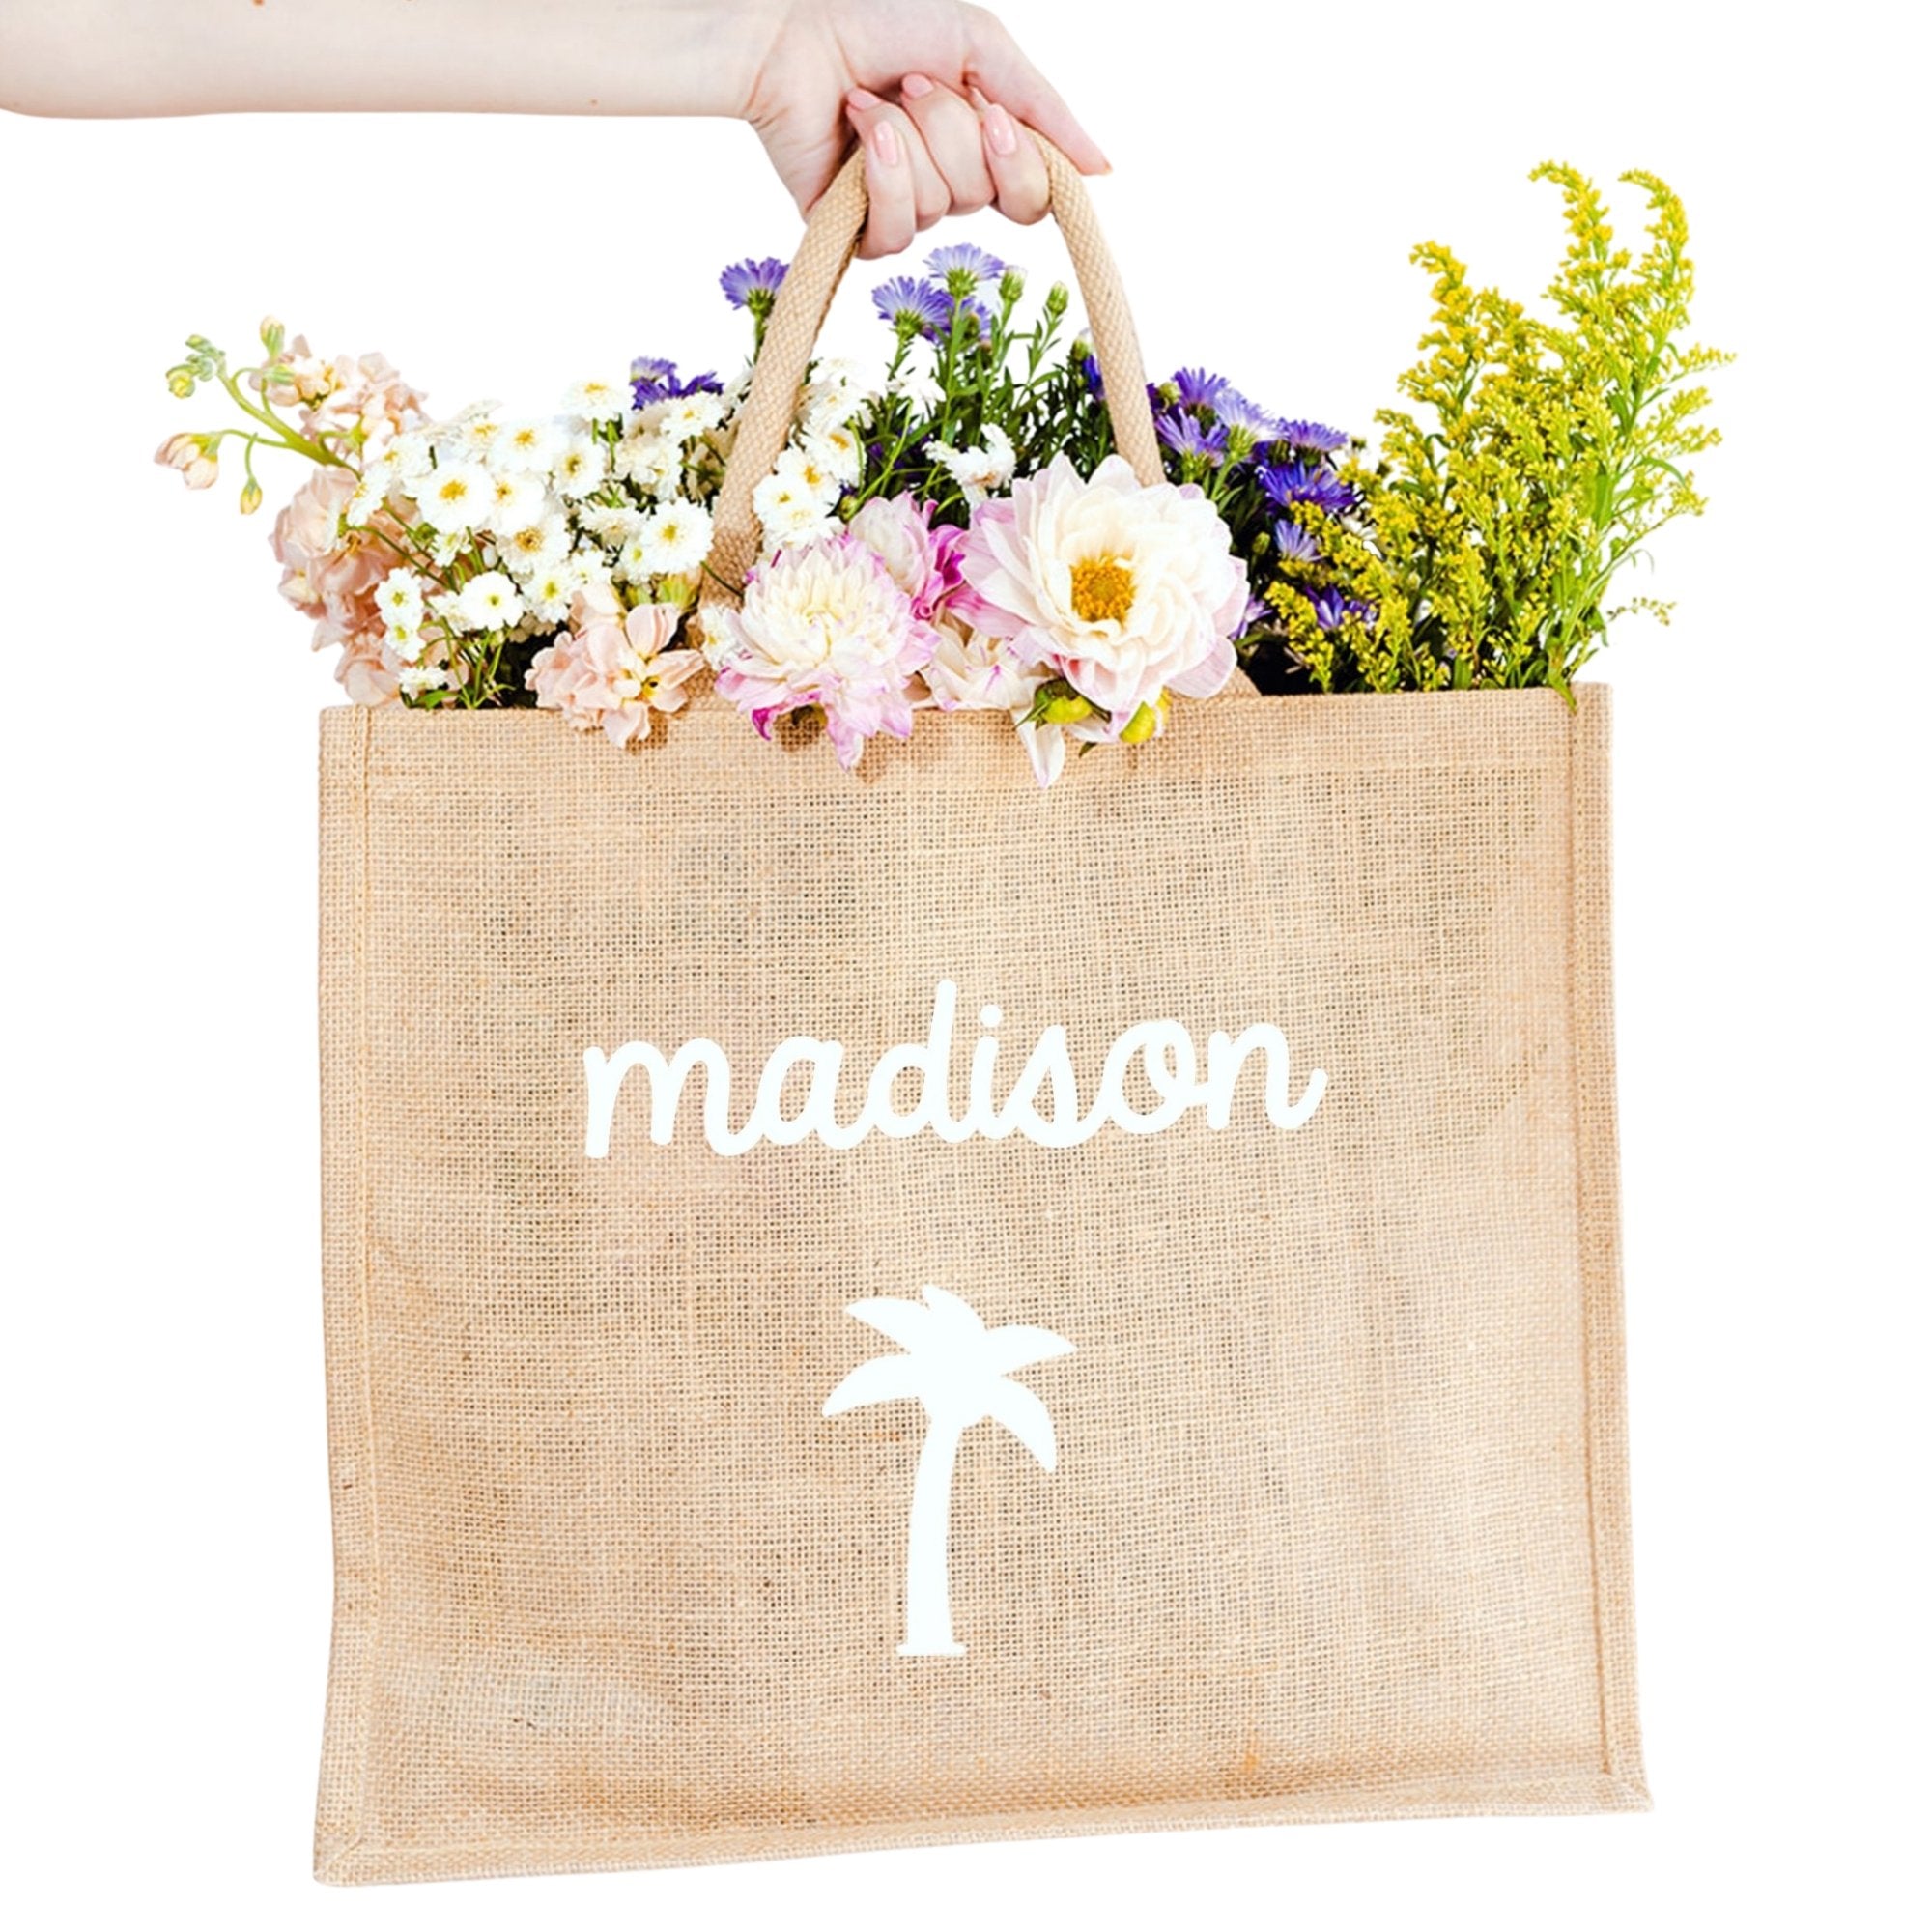 A custom jute bag reads "Madison" on the front in cursive with a palm tree icon